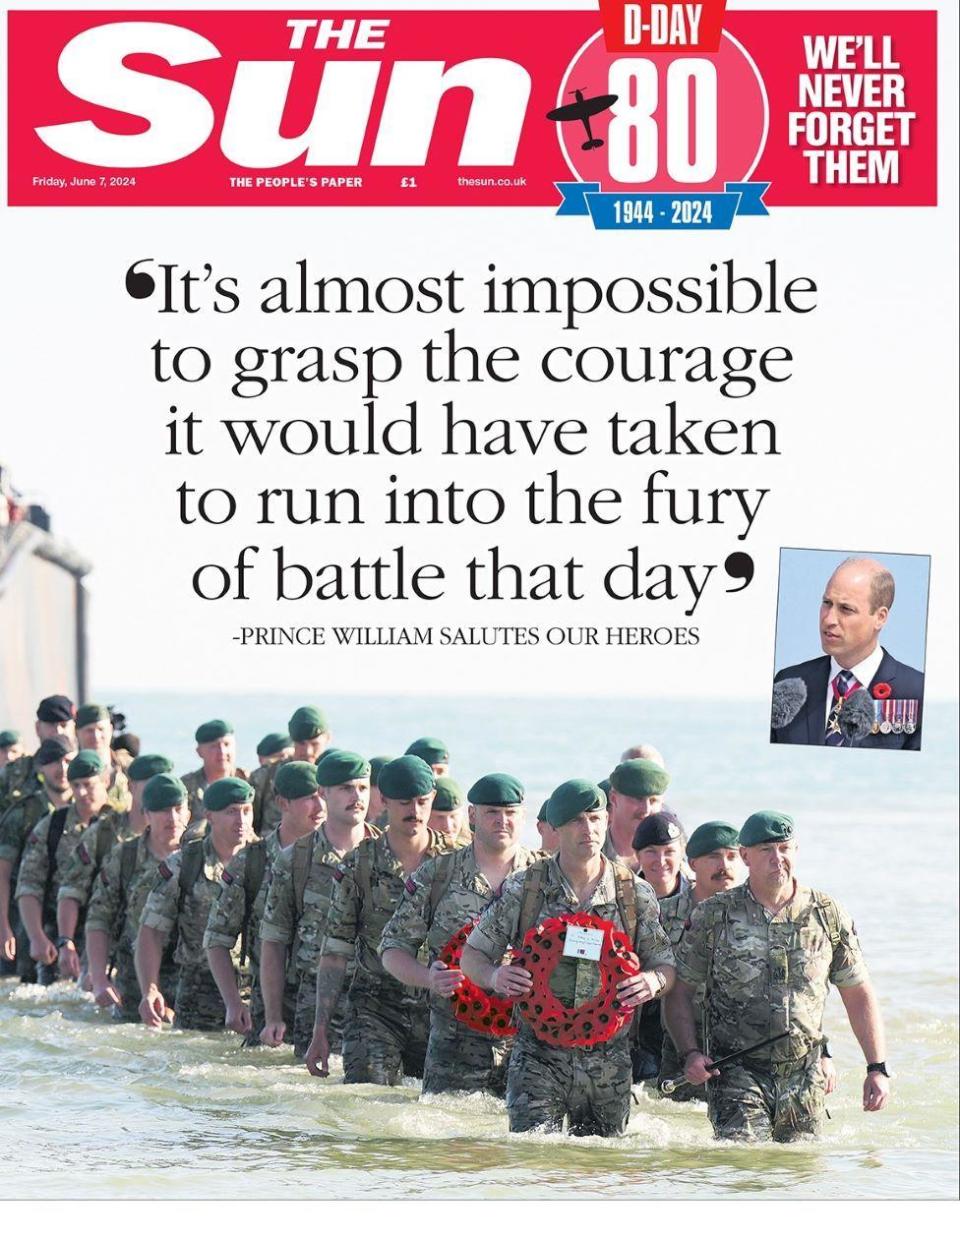 The front page of the Sun